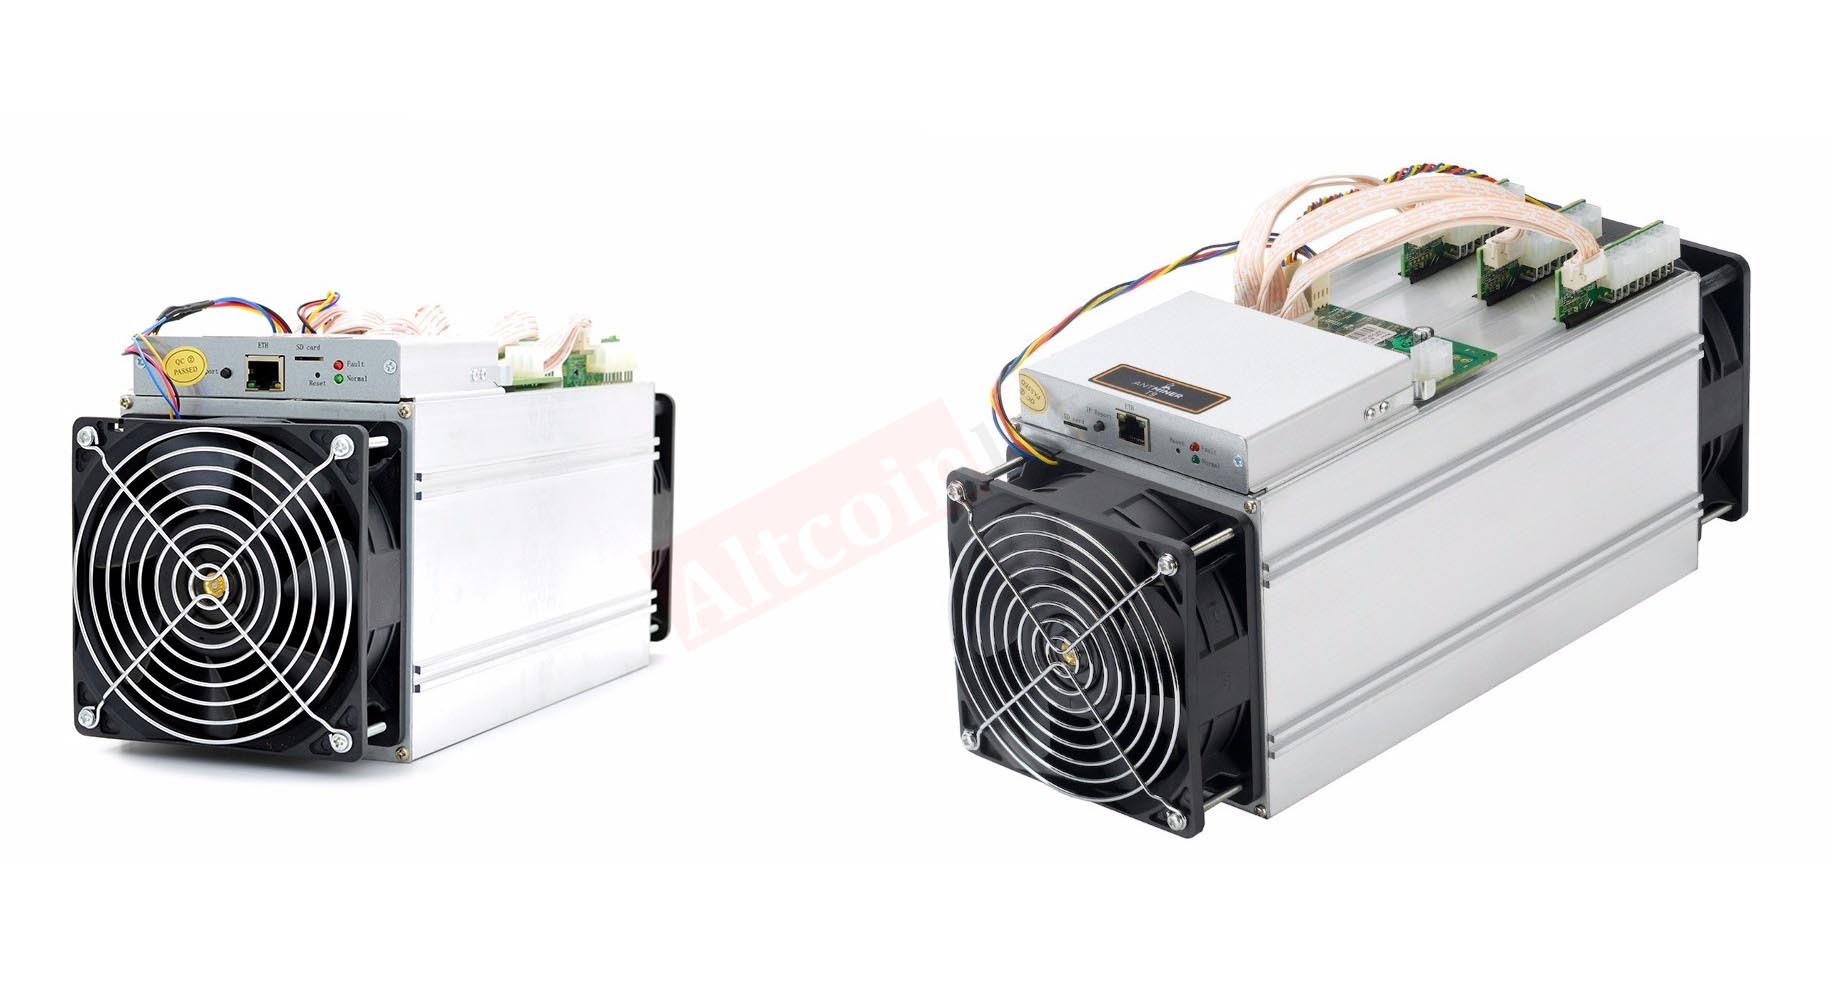 Antminer D3 Suppliers, all Quality Antminer D3 Suppliers on coinlog.fun